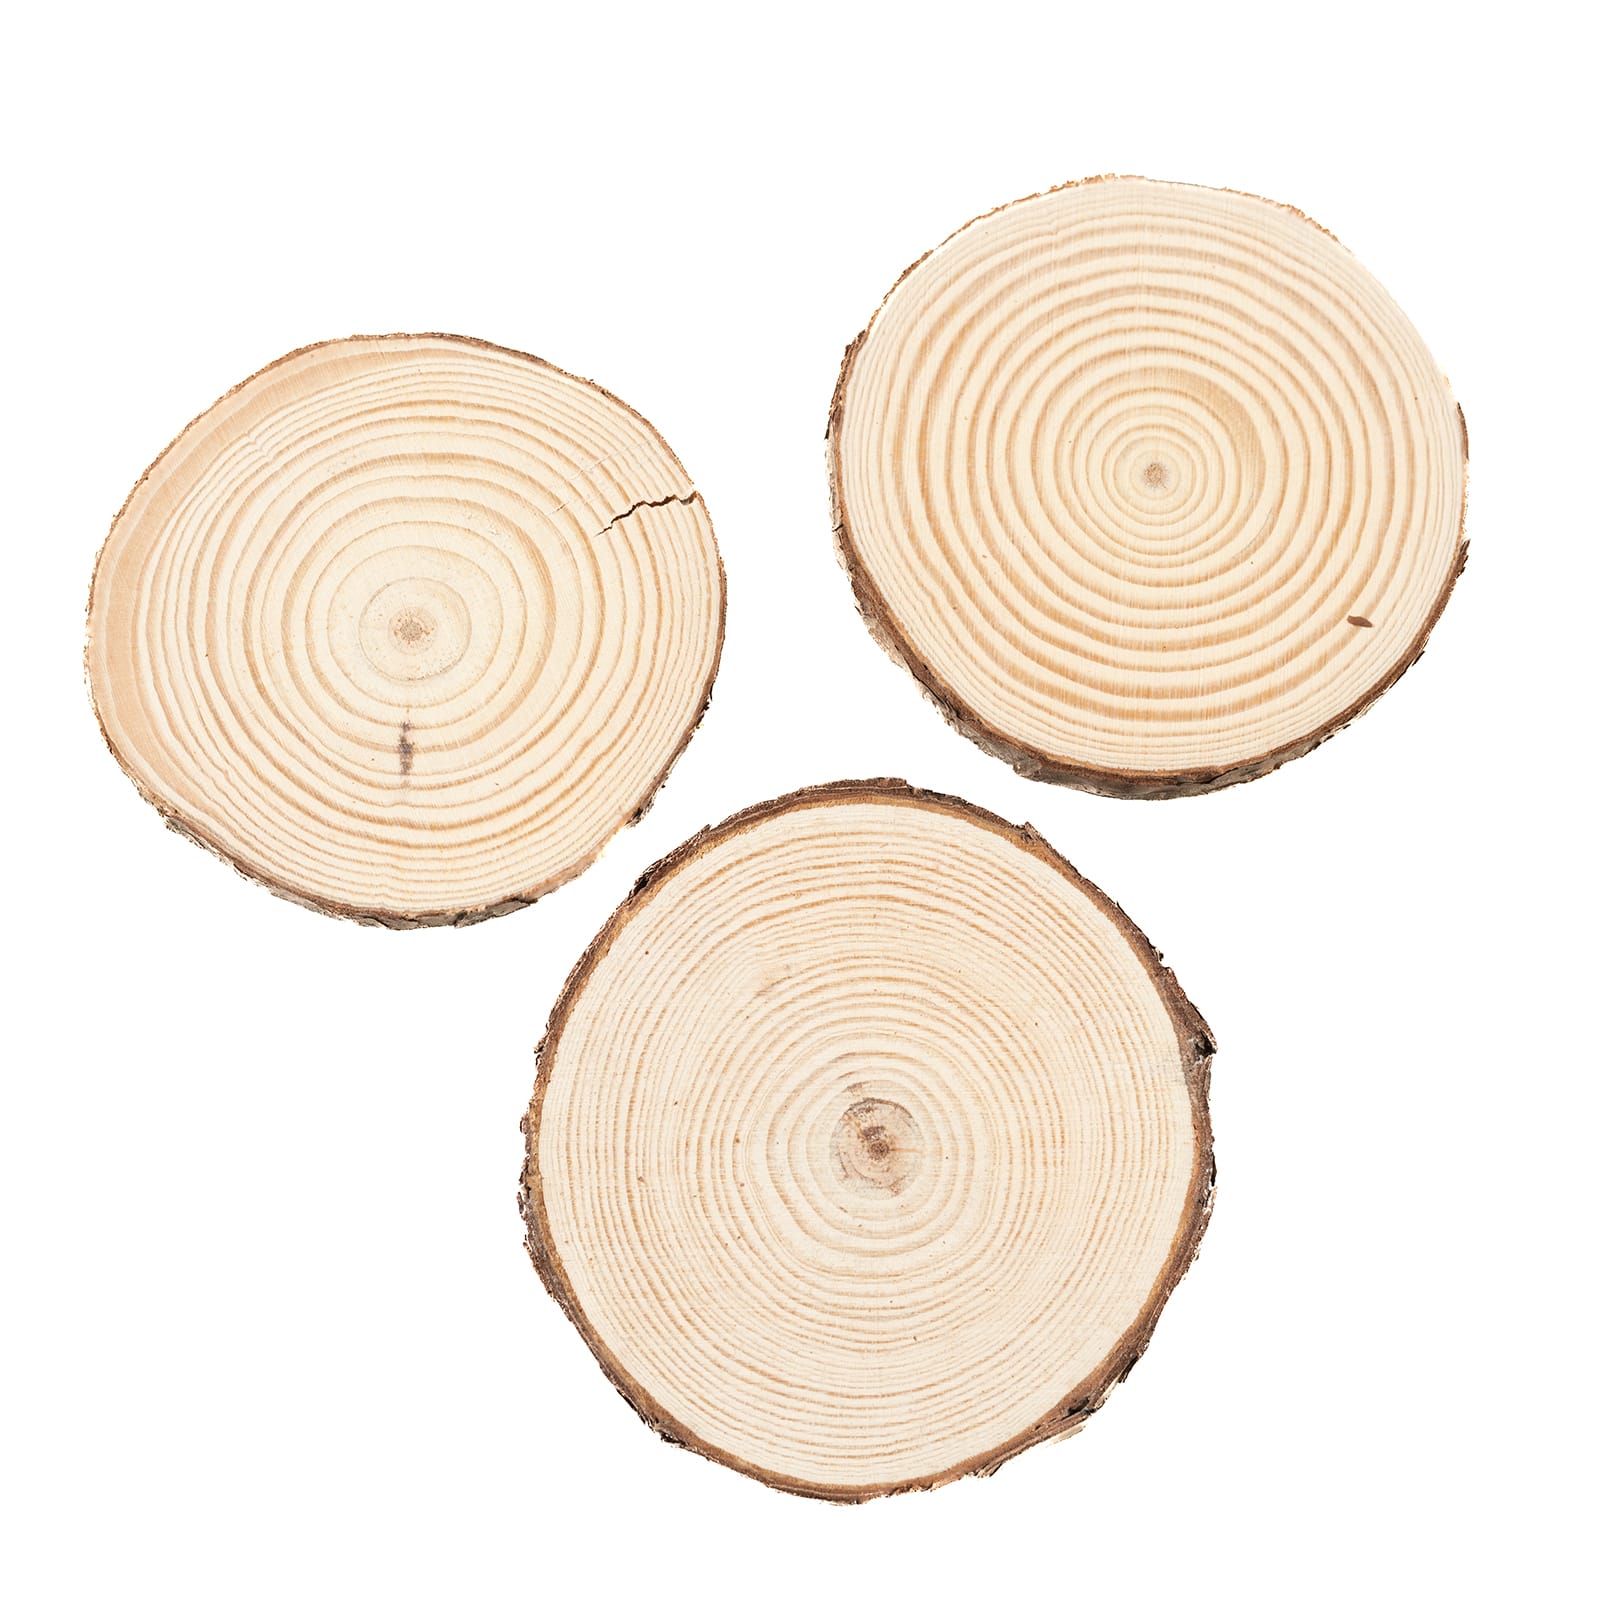 Foam Wood Slices with Make it Fun Crafts